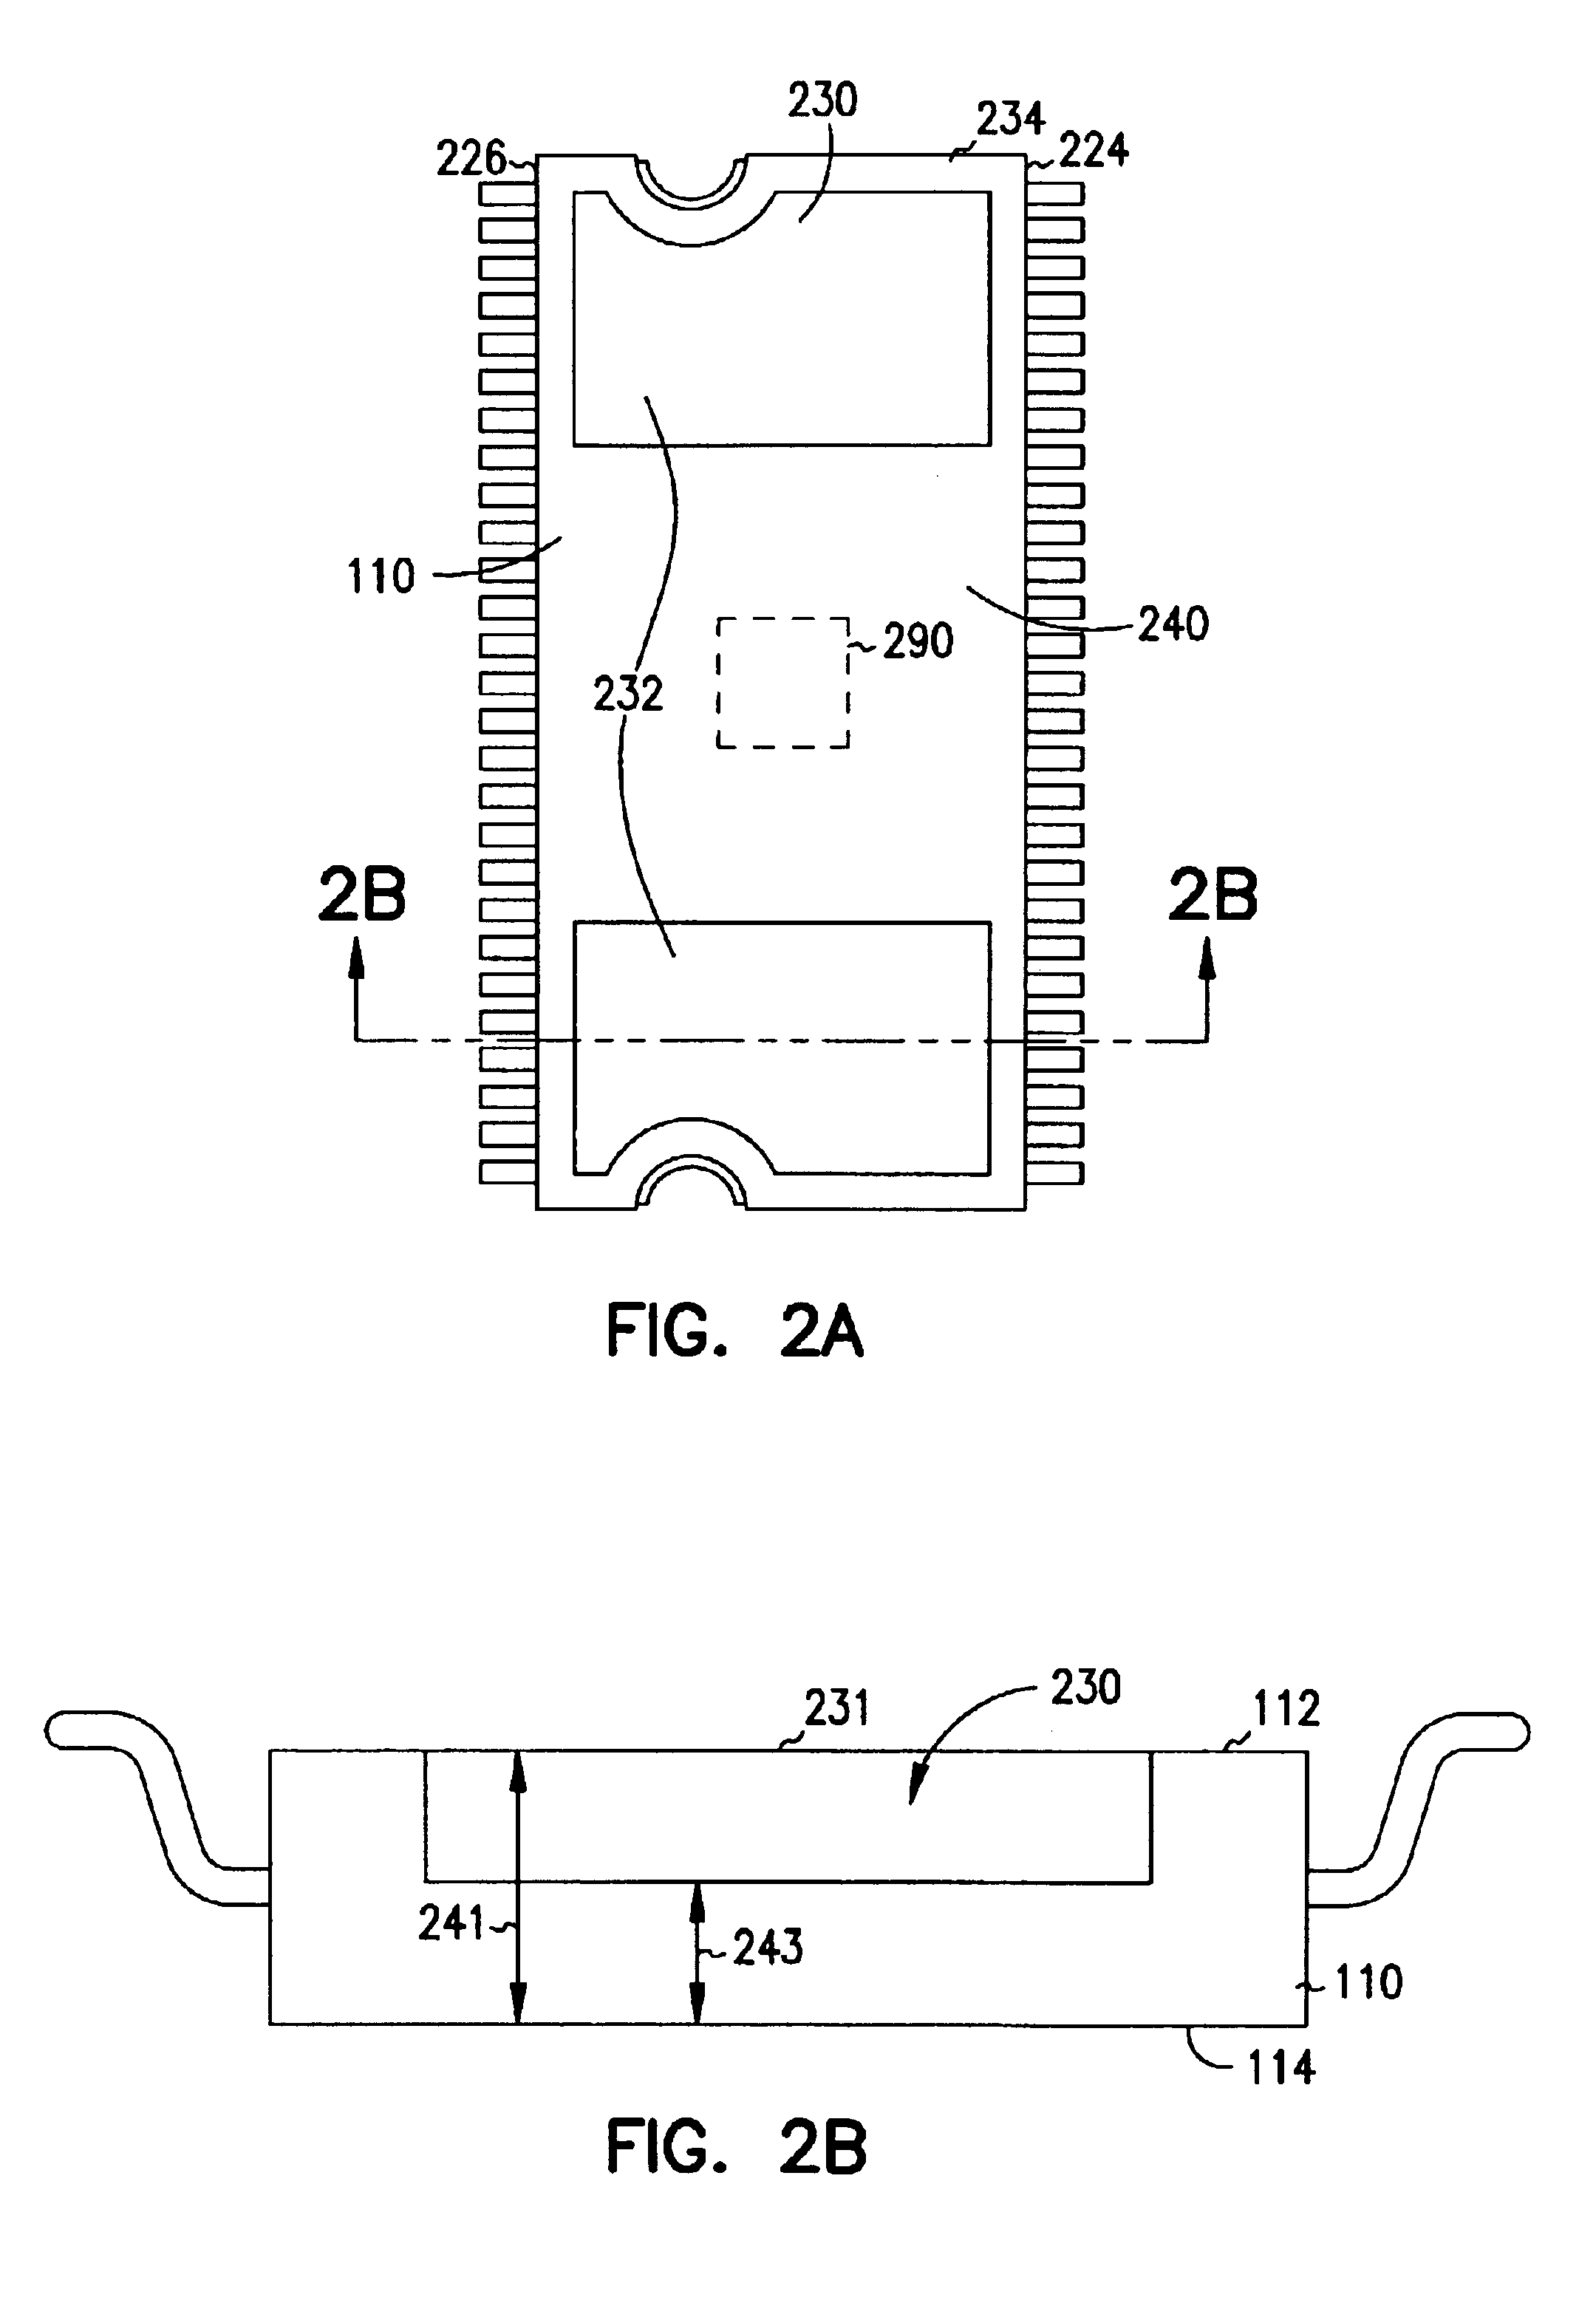 Method for making an integrated circuit package having reduced bow